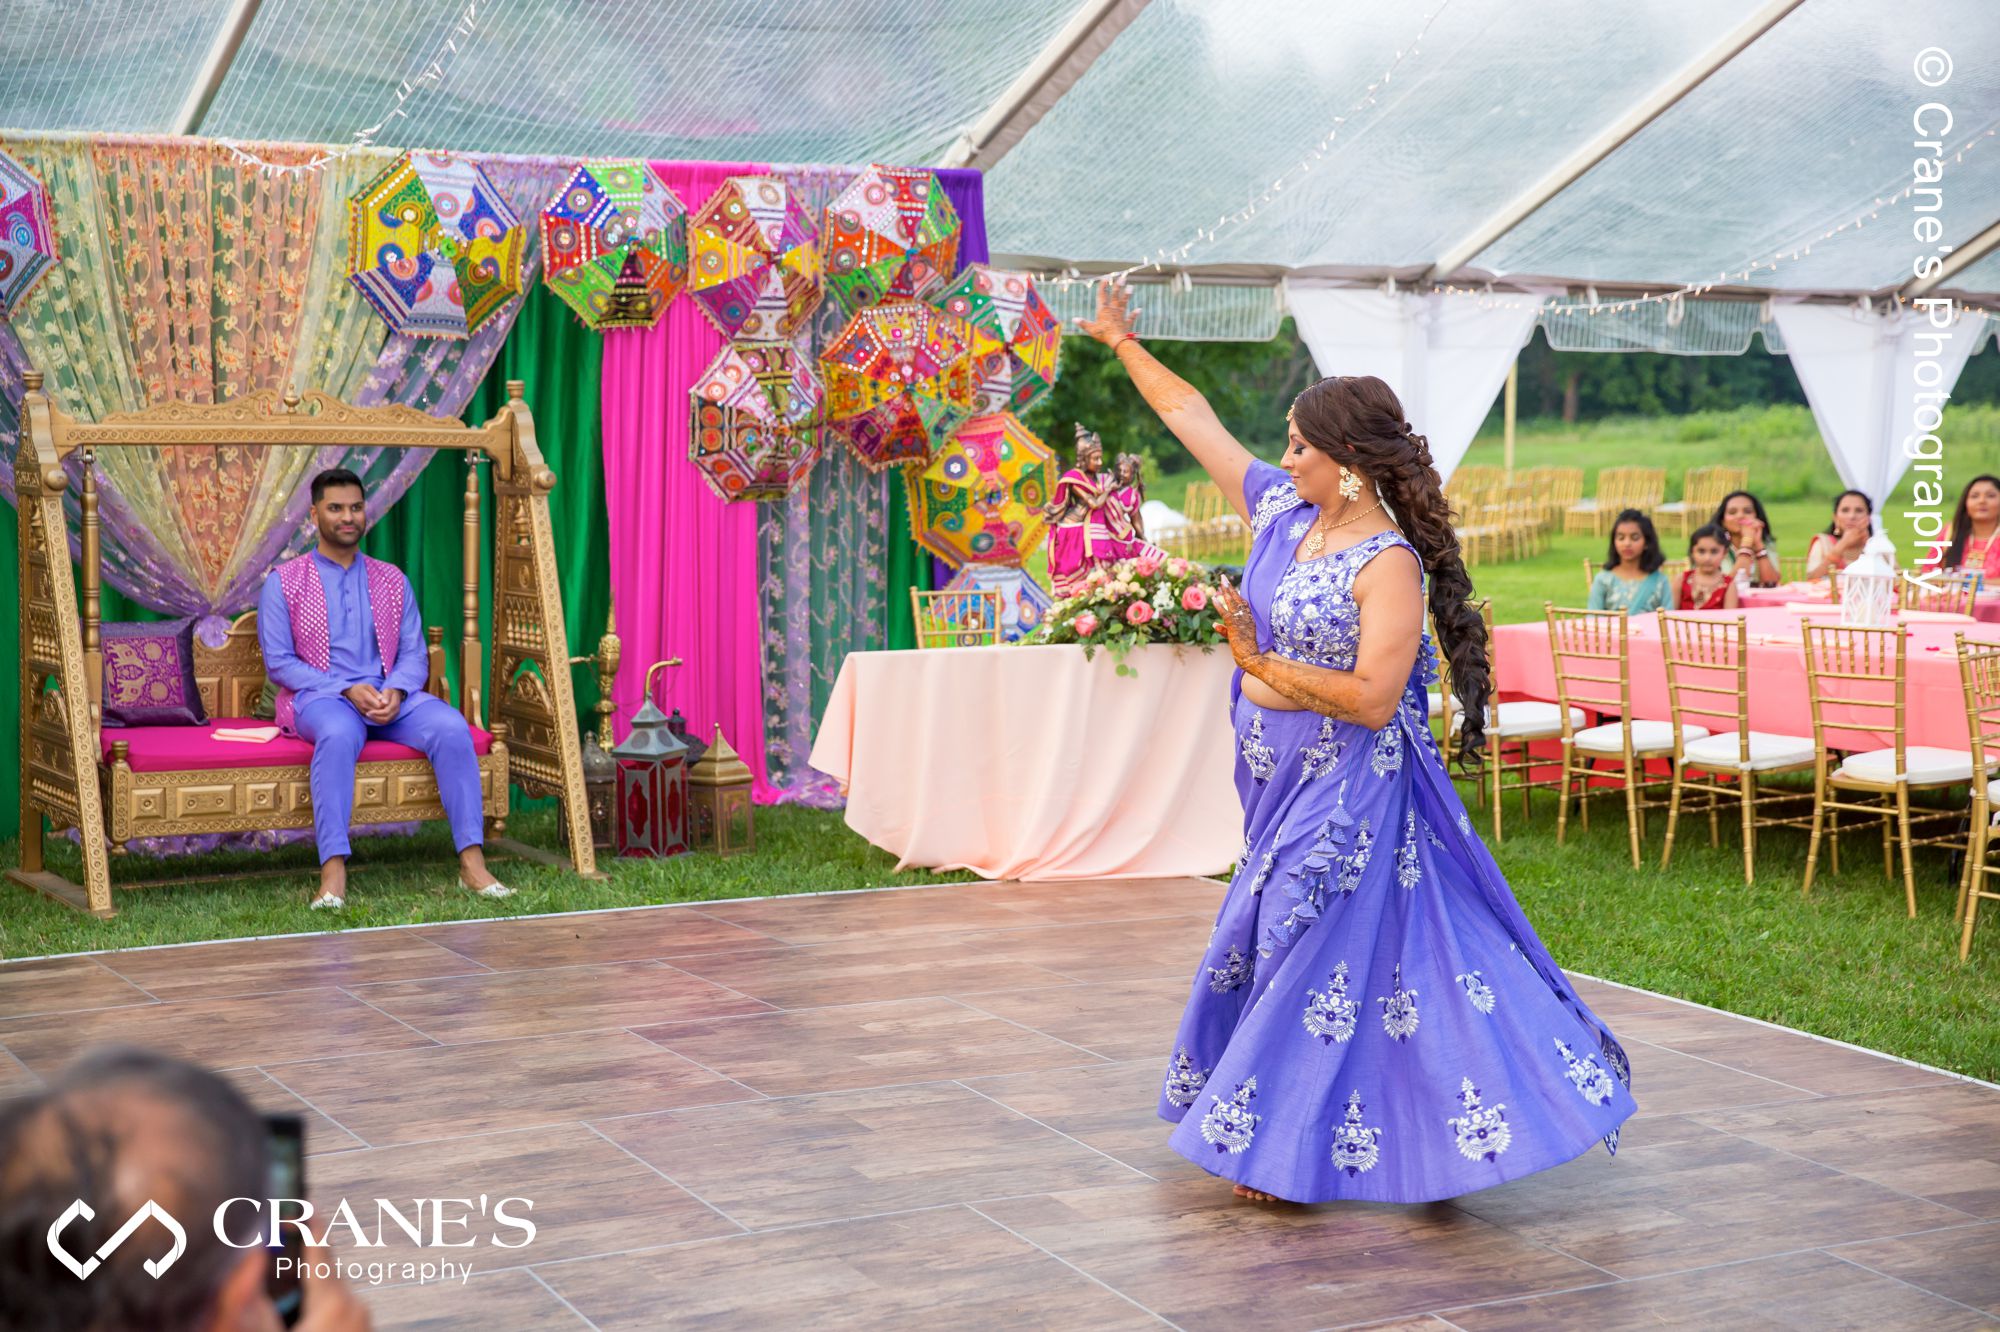 An Indian bride perform a traditional dance for her groom at their Sangeet